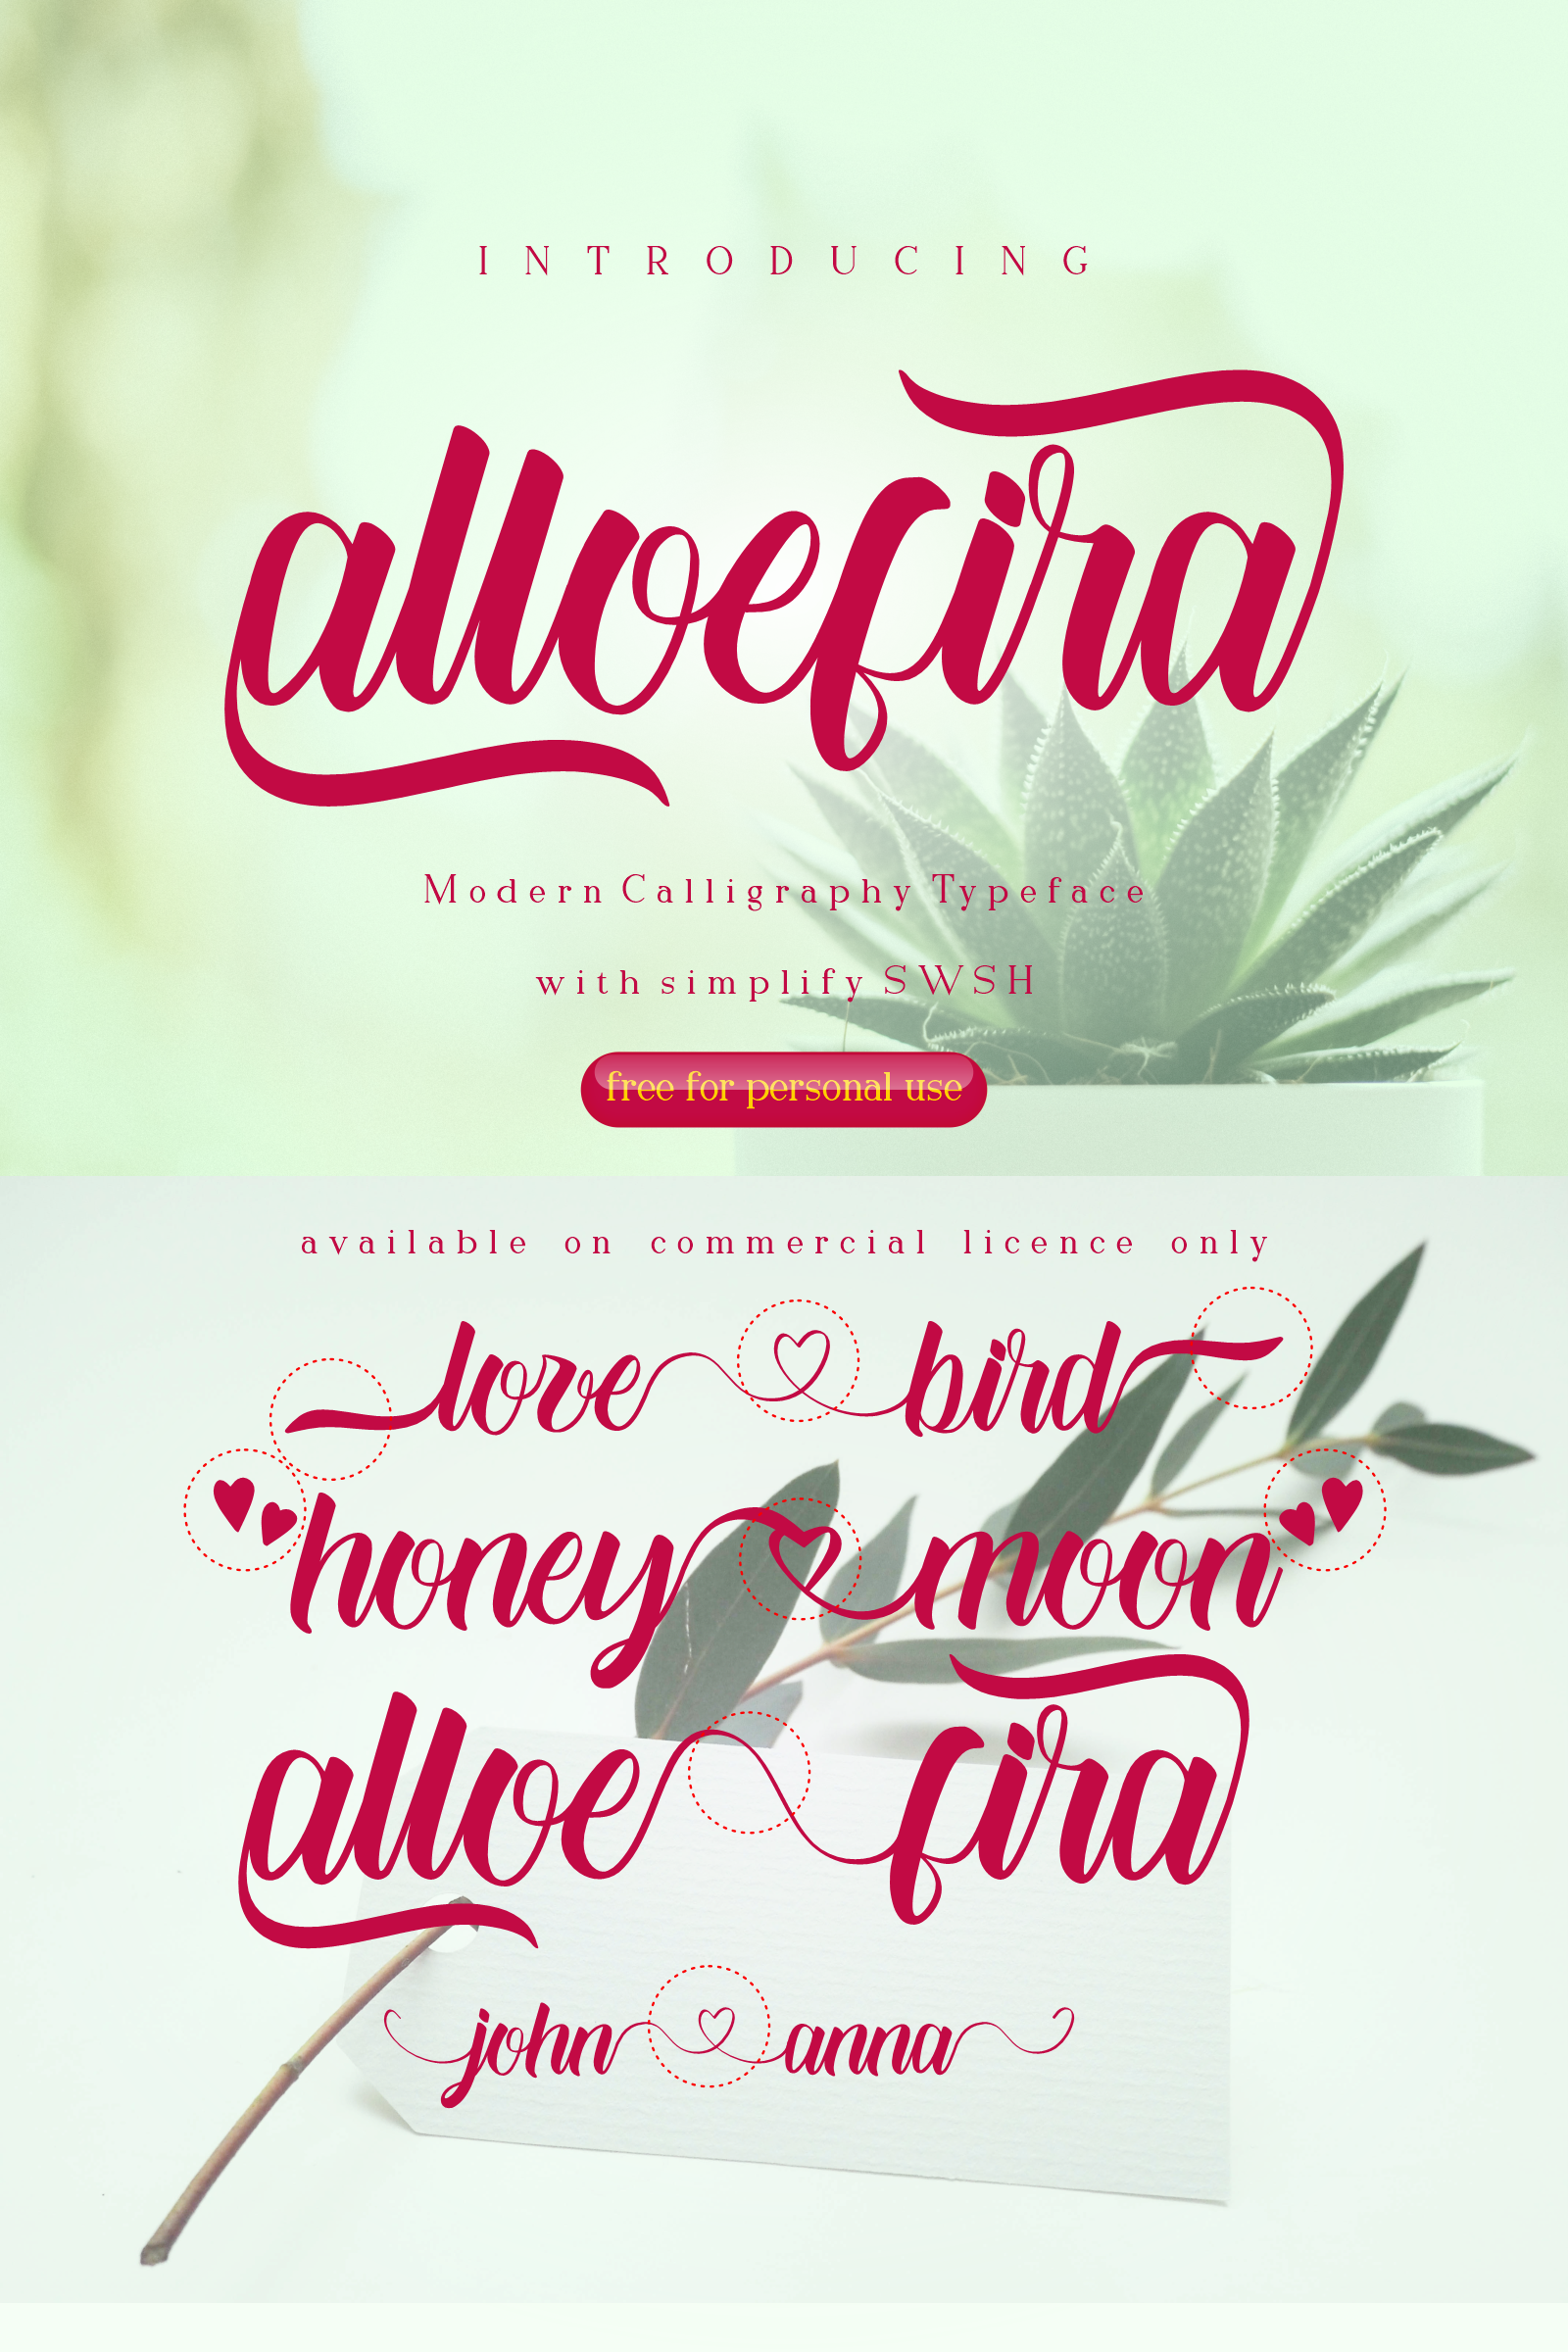 Alloefira free for personal